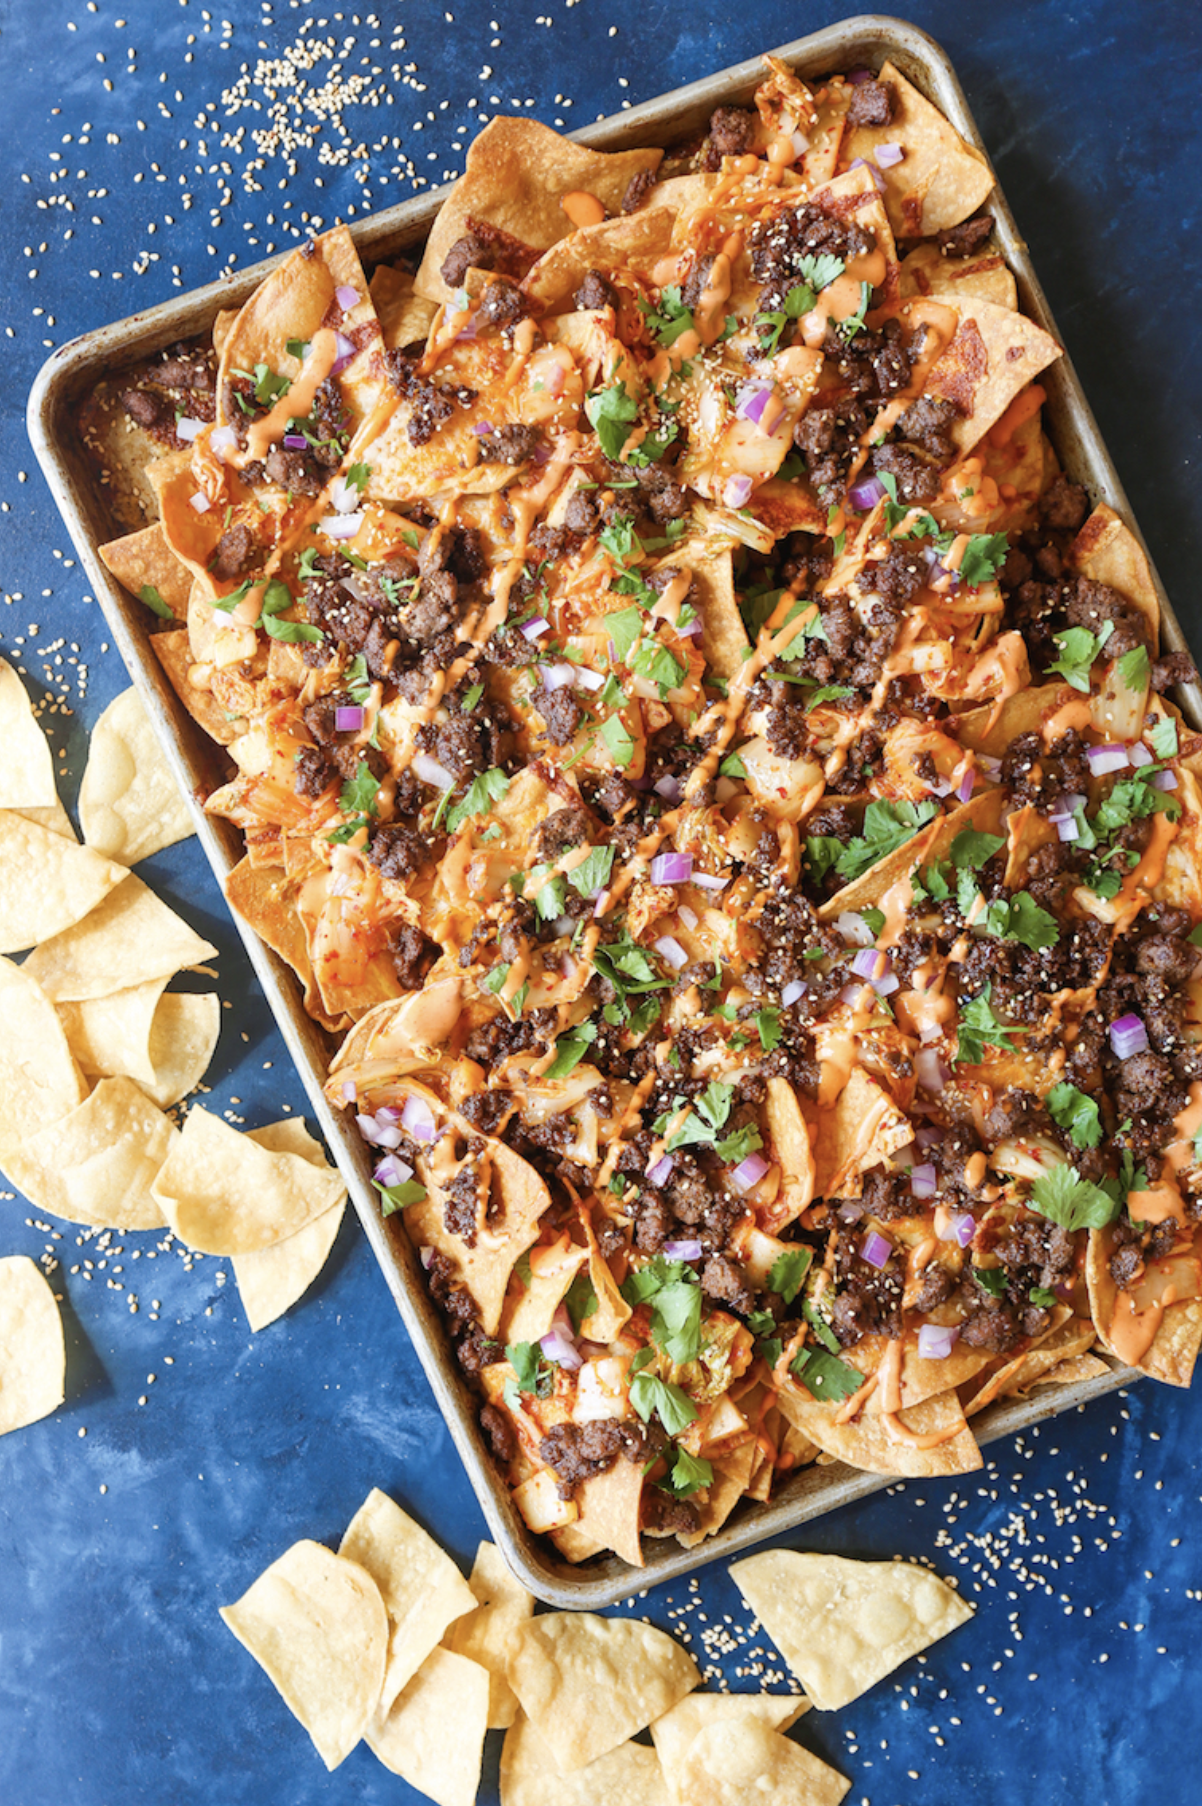 generic image of nachos on a platter over a blue table.